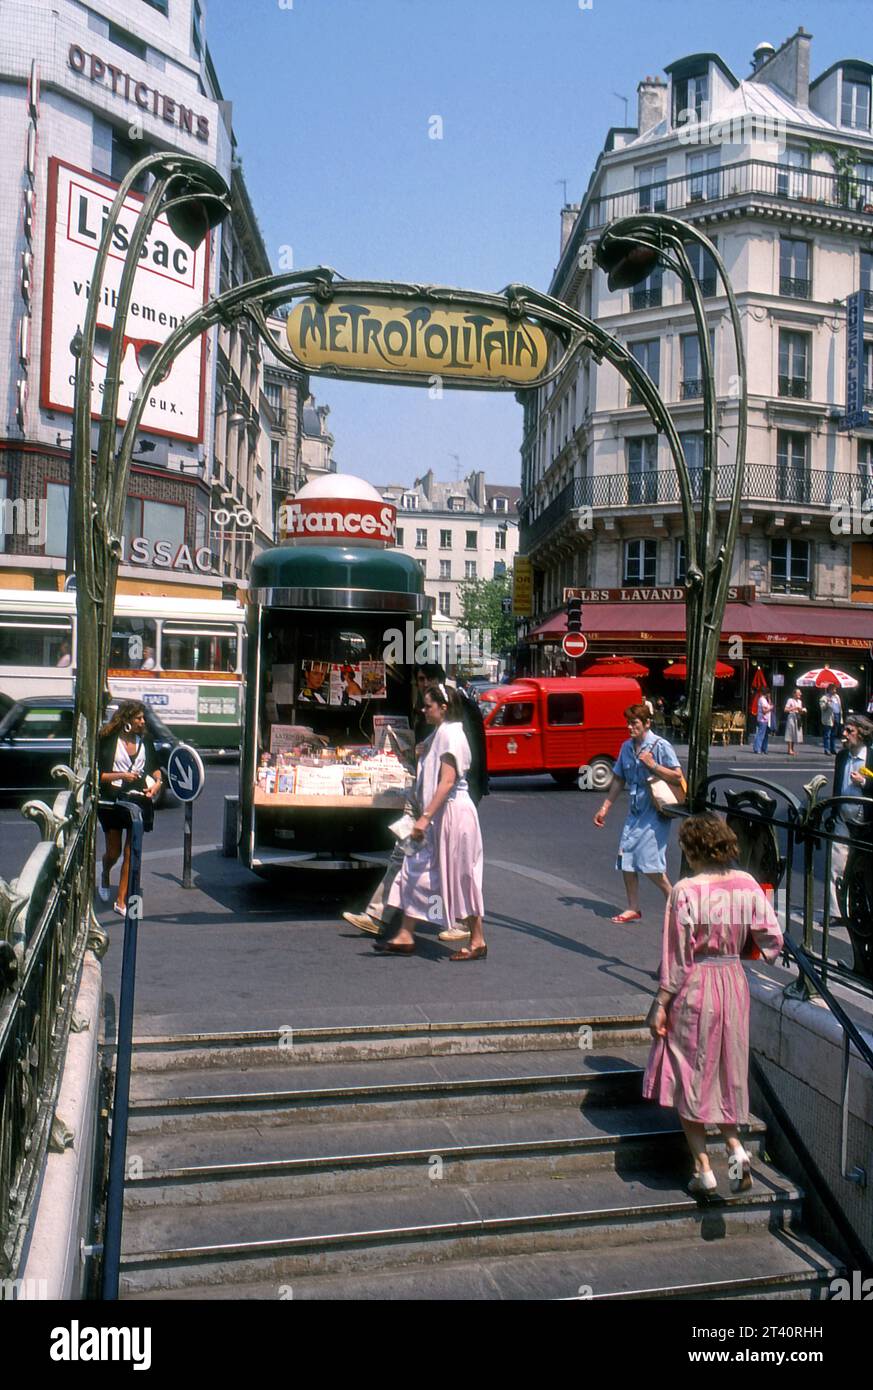 Street scene with Metropolitain sign at entrance in Paris, France, Europe Stock Photo